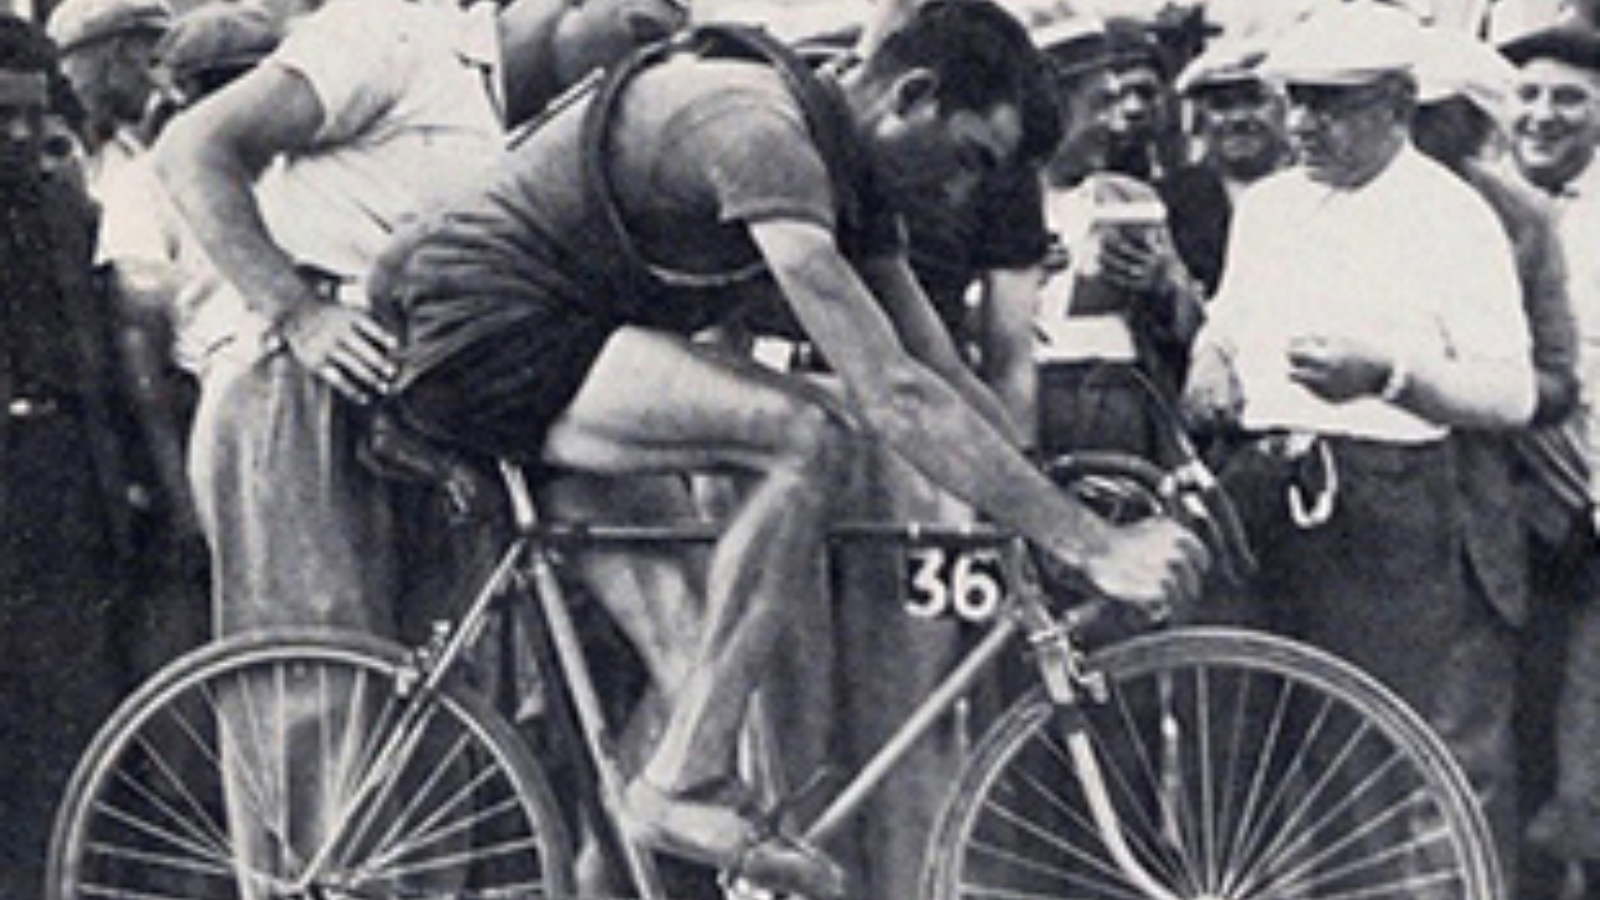 French cyclist Antonin Magne is about to start his first imdividual time trial at the Tour de France in 1934